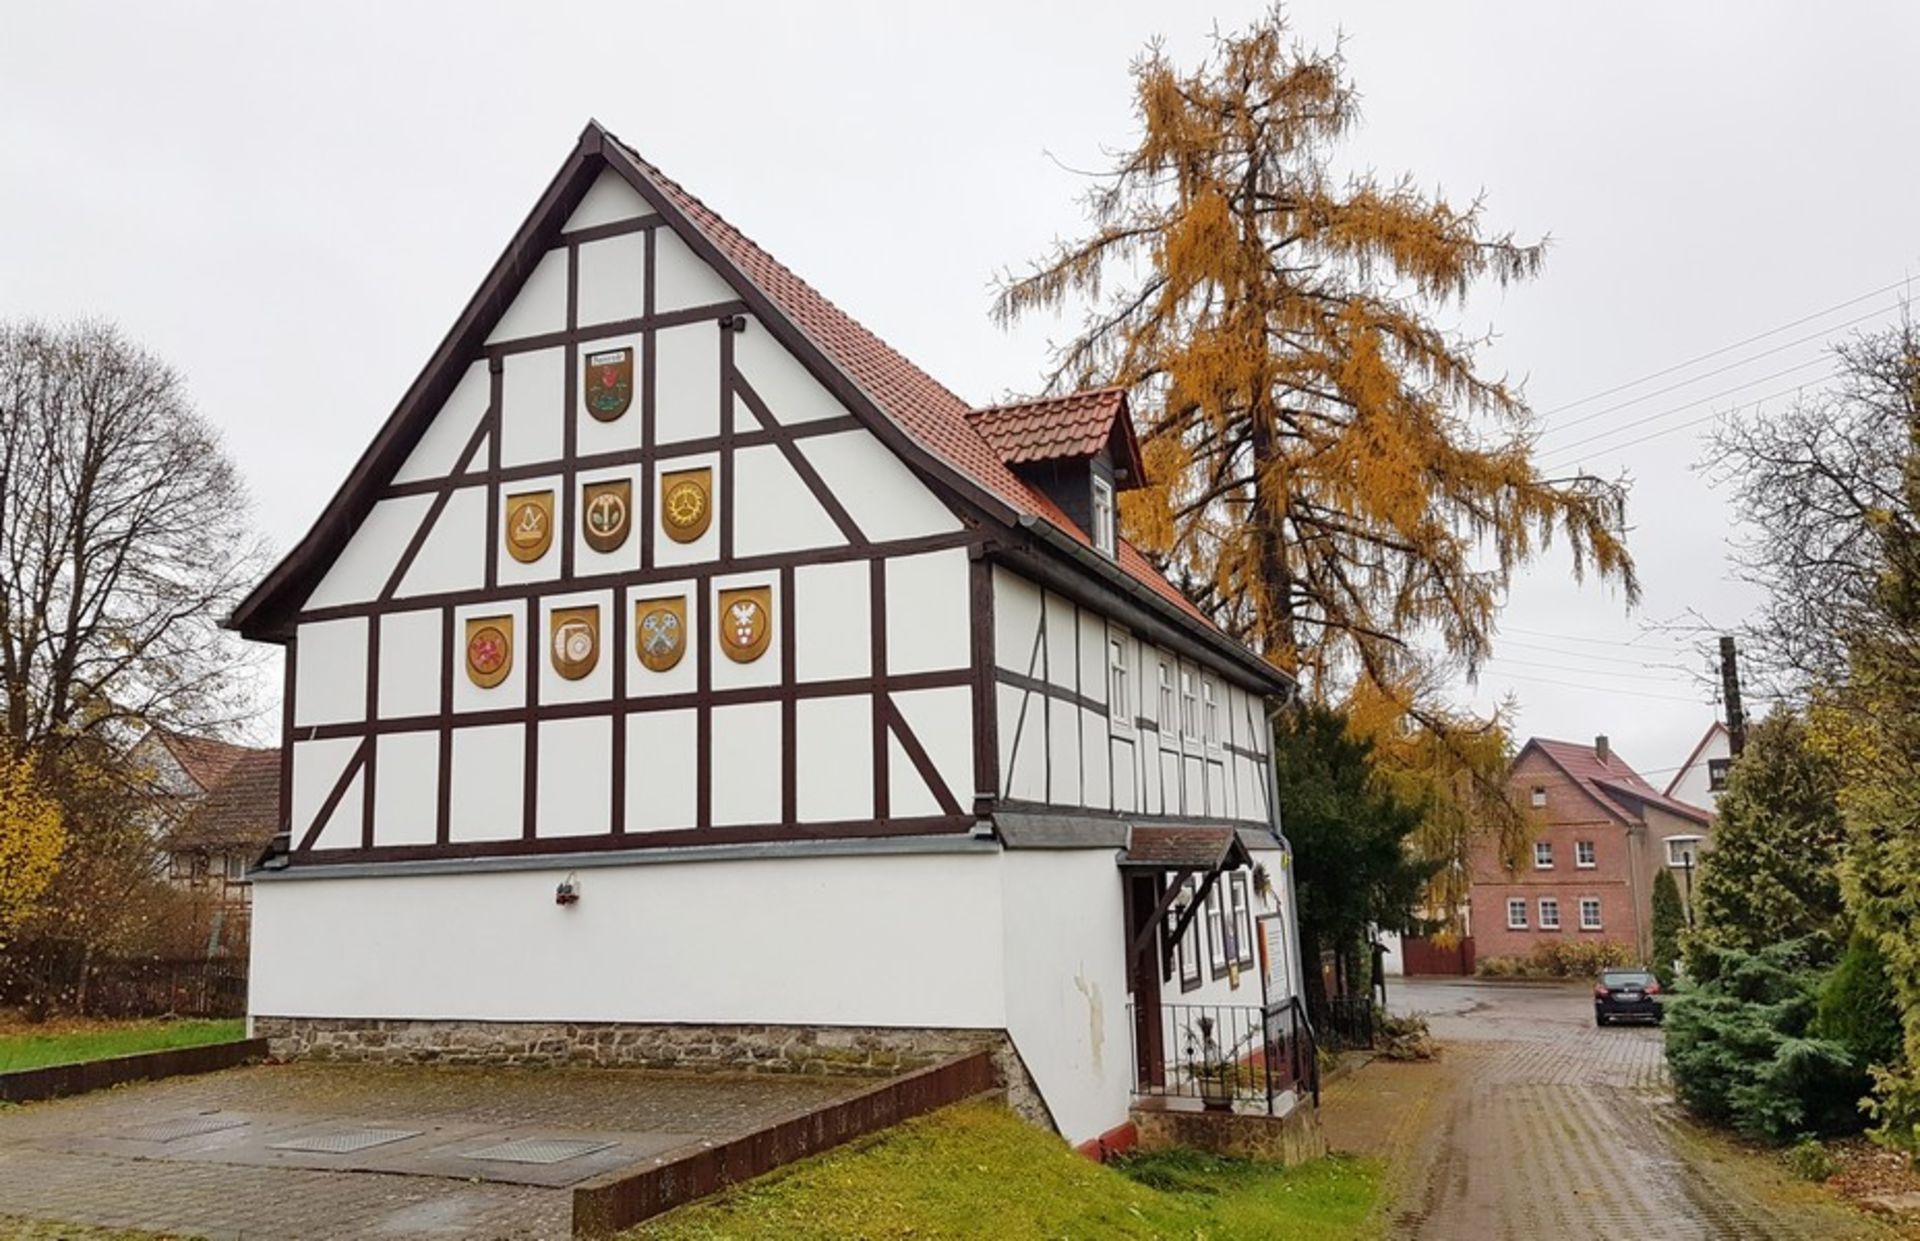 Two Storey Family Home in Sudharz, Germany - Image 50 of 51